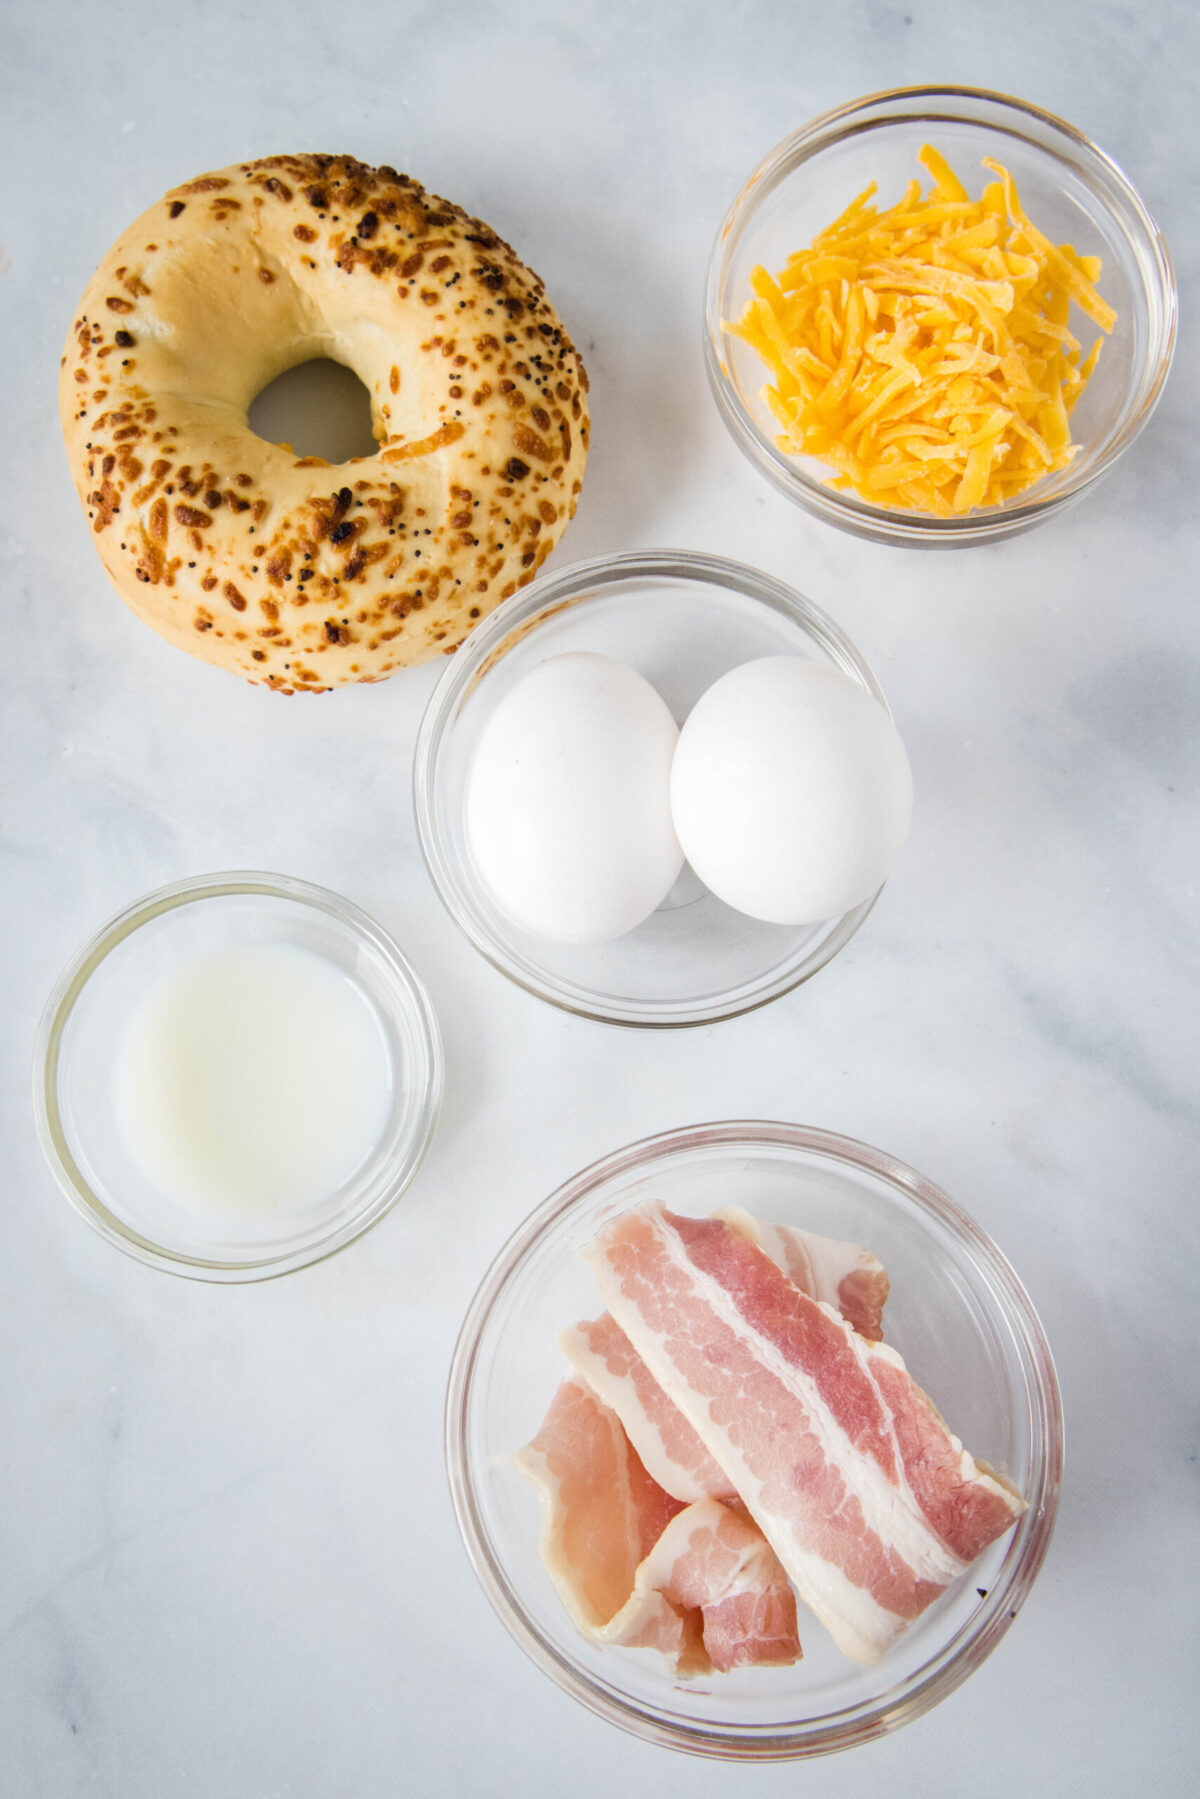 Overhead view of the ingredients needed for a bacon egg and cheese sandwich: a bagel, a bowl of bacon, a bowl of shredded cheese, a bowl of milk, and two eggs